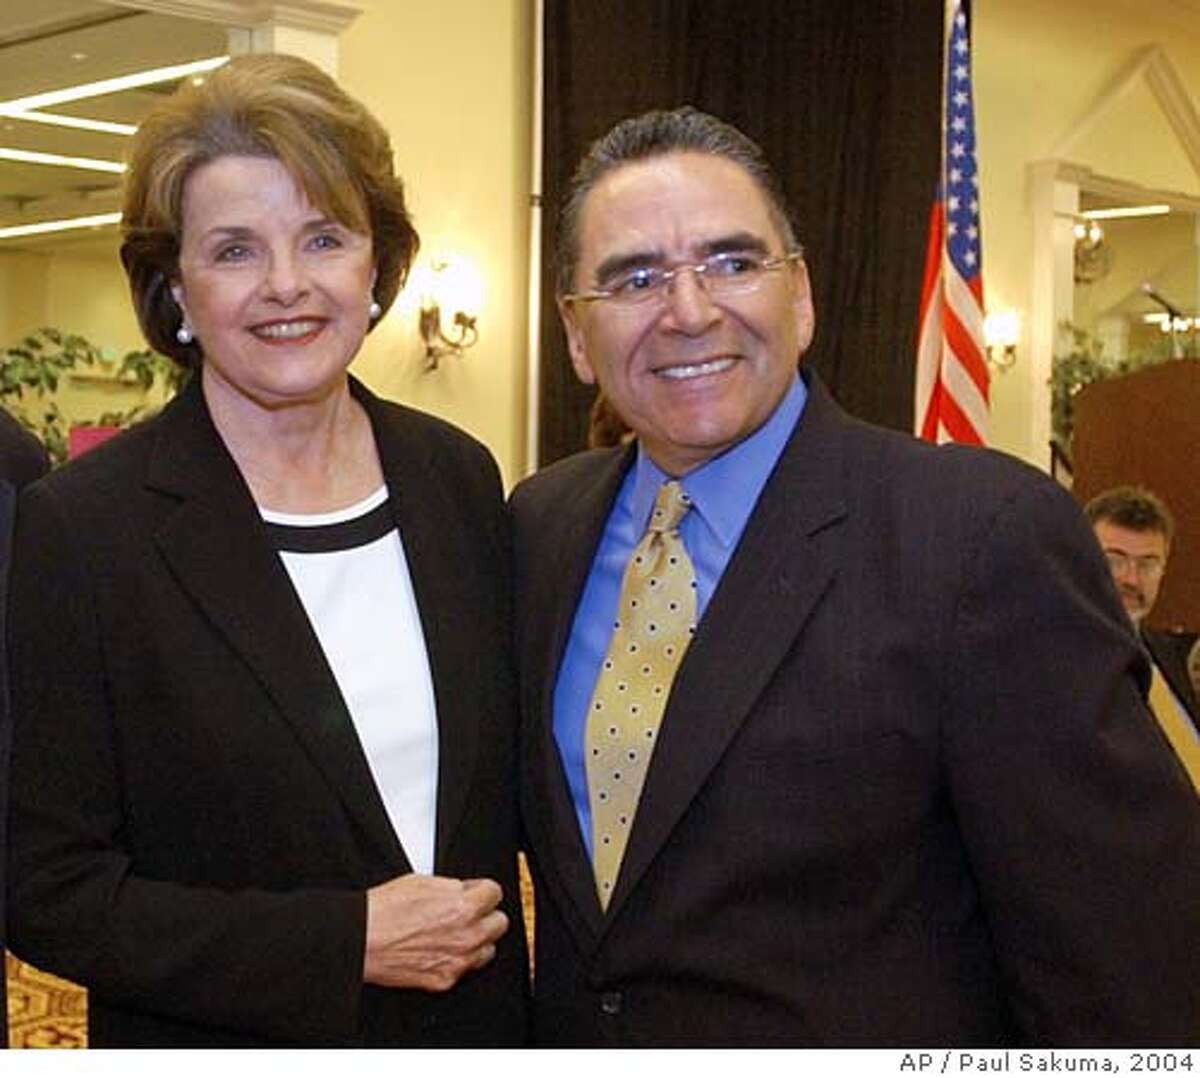 U.S. Sen. Dianne Feinstein, D-Calif., left, smiles with San Jose Mayor Ron Gonzales, right, during a meeting with Silicon Valley business leaders in San Jose, Calif., Wednesday, April 14, 2004 to discuss the flagging local economy, offshore outsourcing of jobs, tax issues and Internet access programs affecting the technology industry. Feinstein also talked about the latest developments in Iraq, the Sept. 11 Commission hearings and the growing federal deficit. (AP Photo/Paul Sakuma) San Jose Mayor Ron Gonzales is urging Washington to keep the BART project on track. ALSO RAN: 07/07/2004 Ran on: 10-10-2004 Dianne Feinstein and Barbara Boxer, right, are powerful U.S. senators from California. Ran on: 10-13-2004 Ron Gonzales Ran on: 01-19-2005 Mayors Gavin Newsom of San Francisco (left) and Ron Gonzales of San Jose and the cities they represent receive $24.4 million and $12.1 million, respectively, in the threatened federal block grant funds. Ran on: 01-19-2005 Mayors Gavin Newsom of San Francisco (left) and Ron Gonzales of San Jose and the cities they represent receive $24.4 million and $12.1 million, respectively, in the threatened federal block grant funds. Ran on: 02-10-2005 San Jose Mayor Ron Gonzales delivered an upbeat State of the City speech. Nation#MainNews#Chronicle#6/8/2004#ALL#5star##0421718306